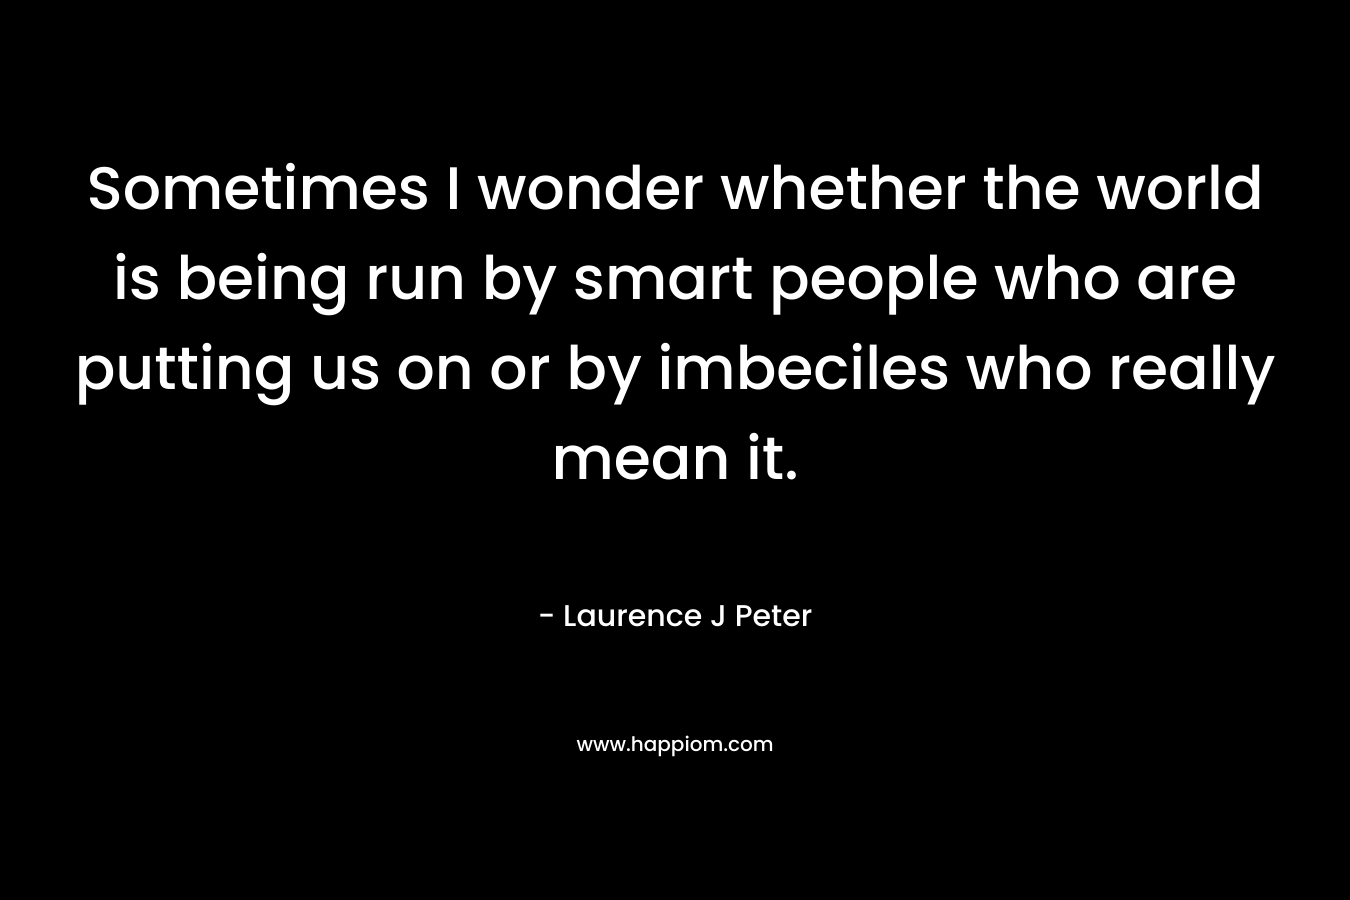 Sometimes I wonder whether the world is being run by smart people who are putting us on or by imbeciles who really mean it. – Laurence J Peter